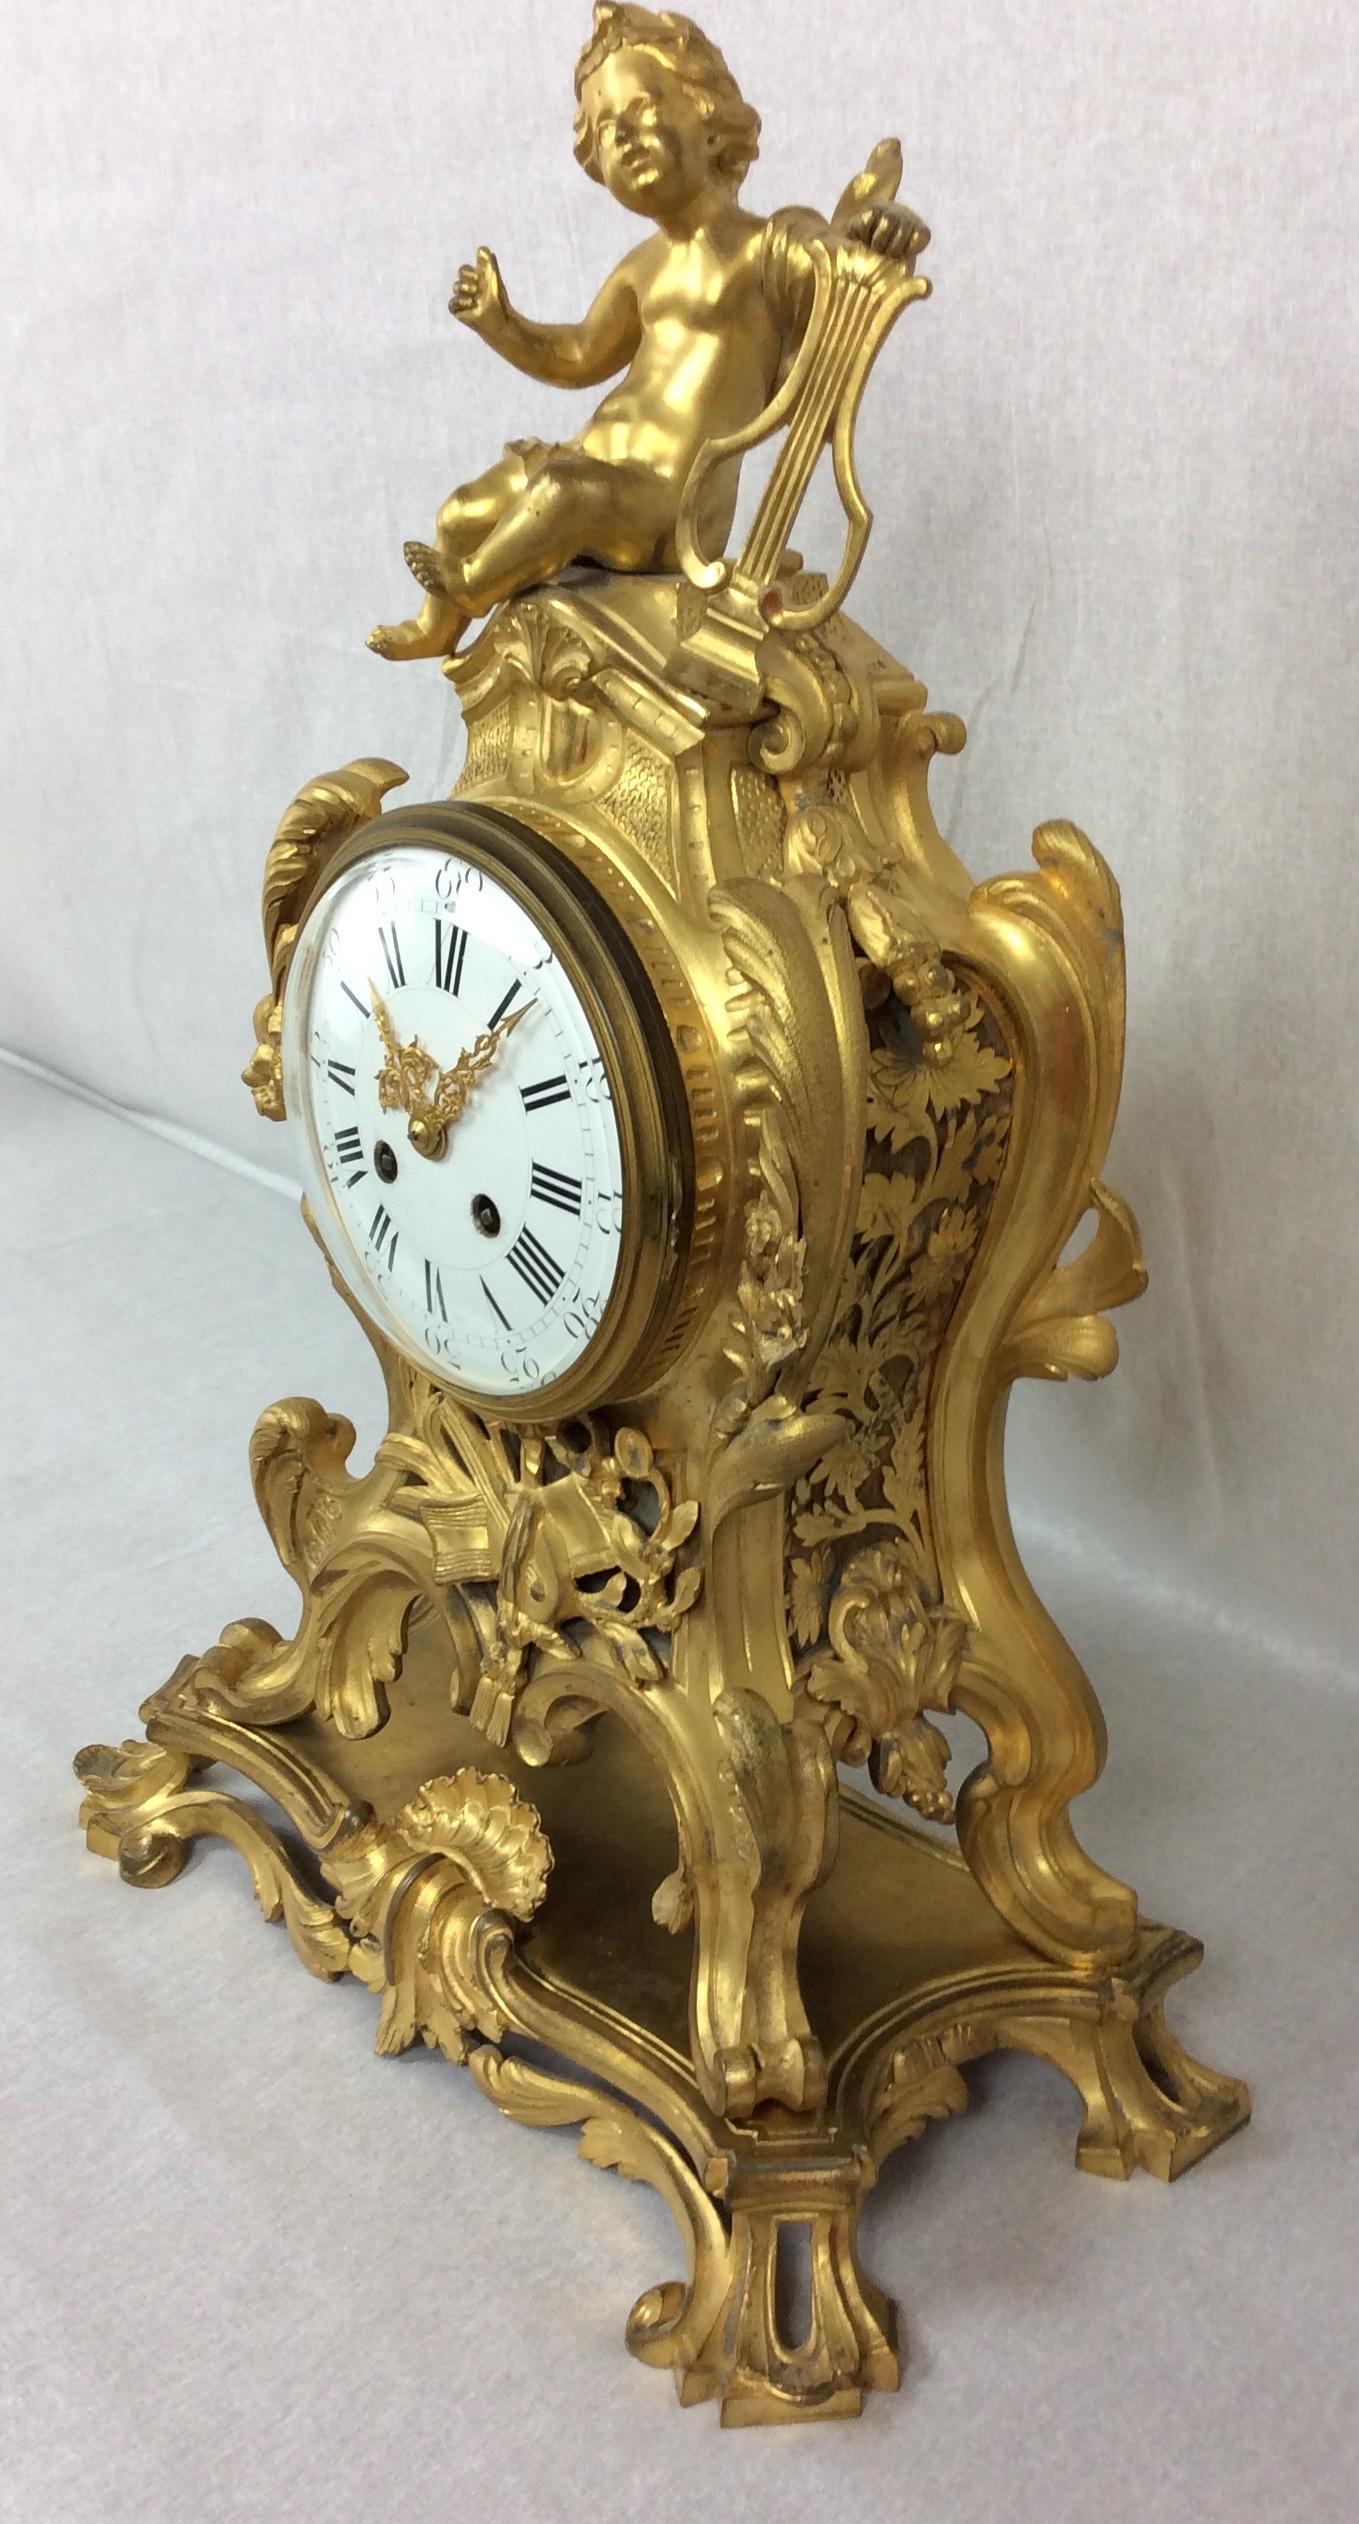 12 of 19
A very large and fine antique French clock set, circa 1880. It is of Rococo design in the manner of Juste Aurele Meissonier and boldly modeled in gilt bronze. Waisted keyhole shape with acanthus leaf shoulders, 'C' scroll feet standing on